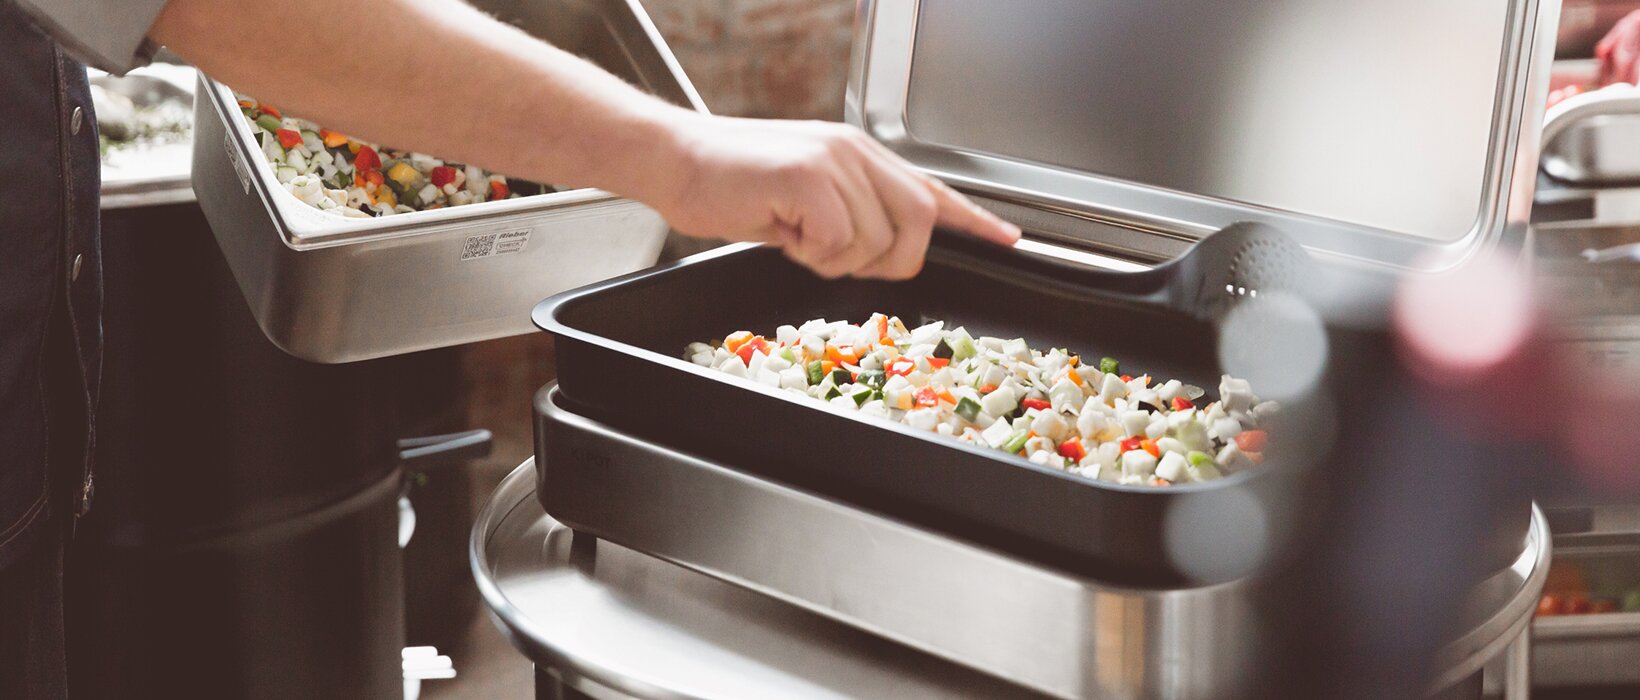 Rapid-cook kit can drastically reduce cooking times